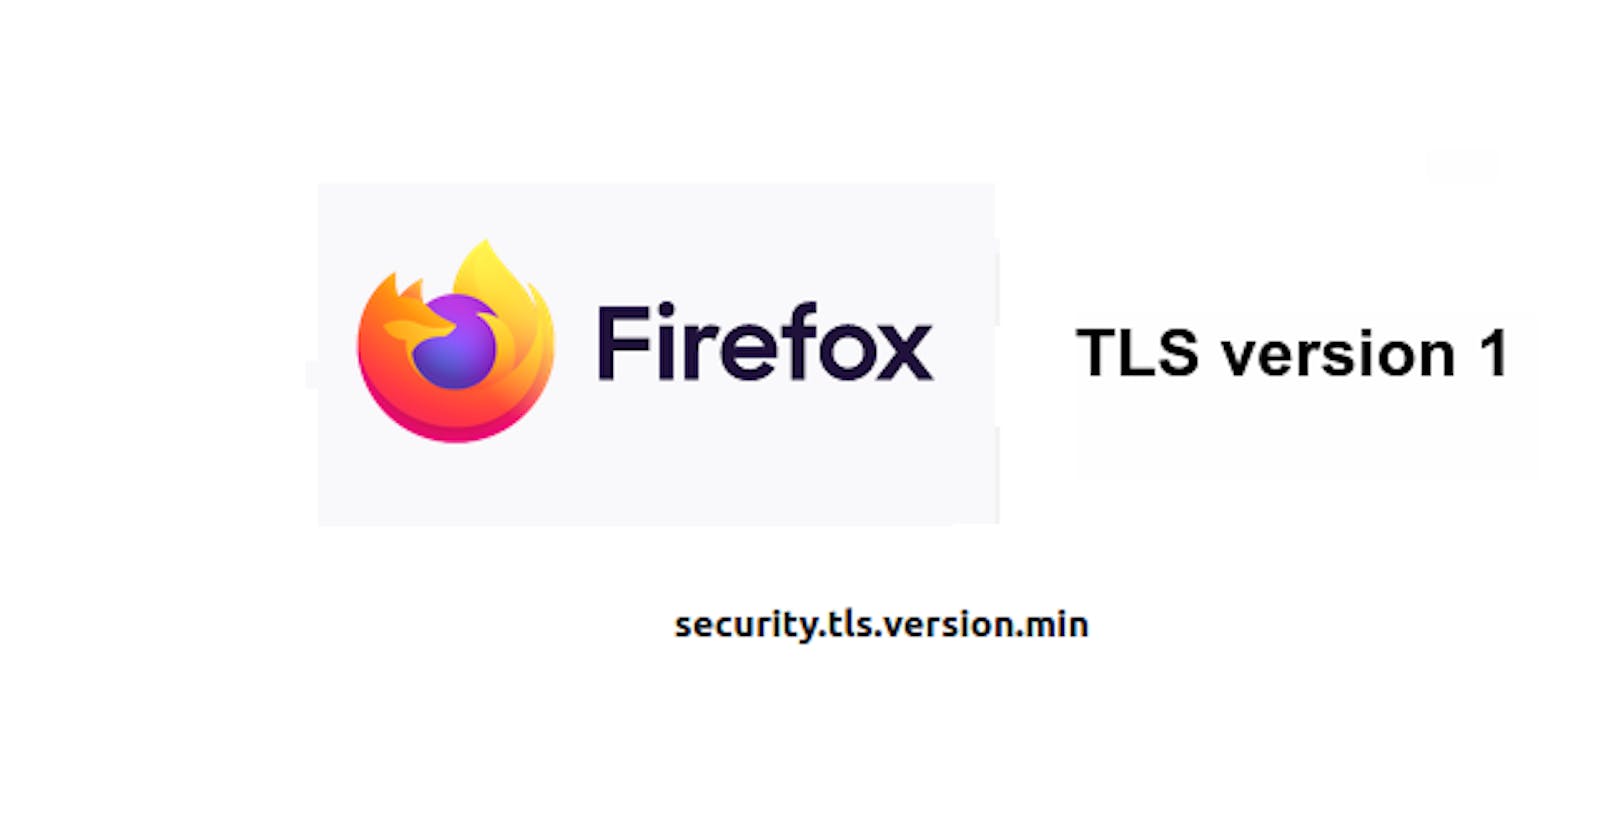 Quick Fix: How to enable TLS version 1 in FireFox